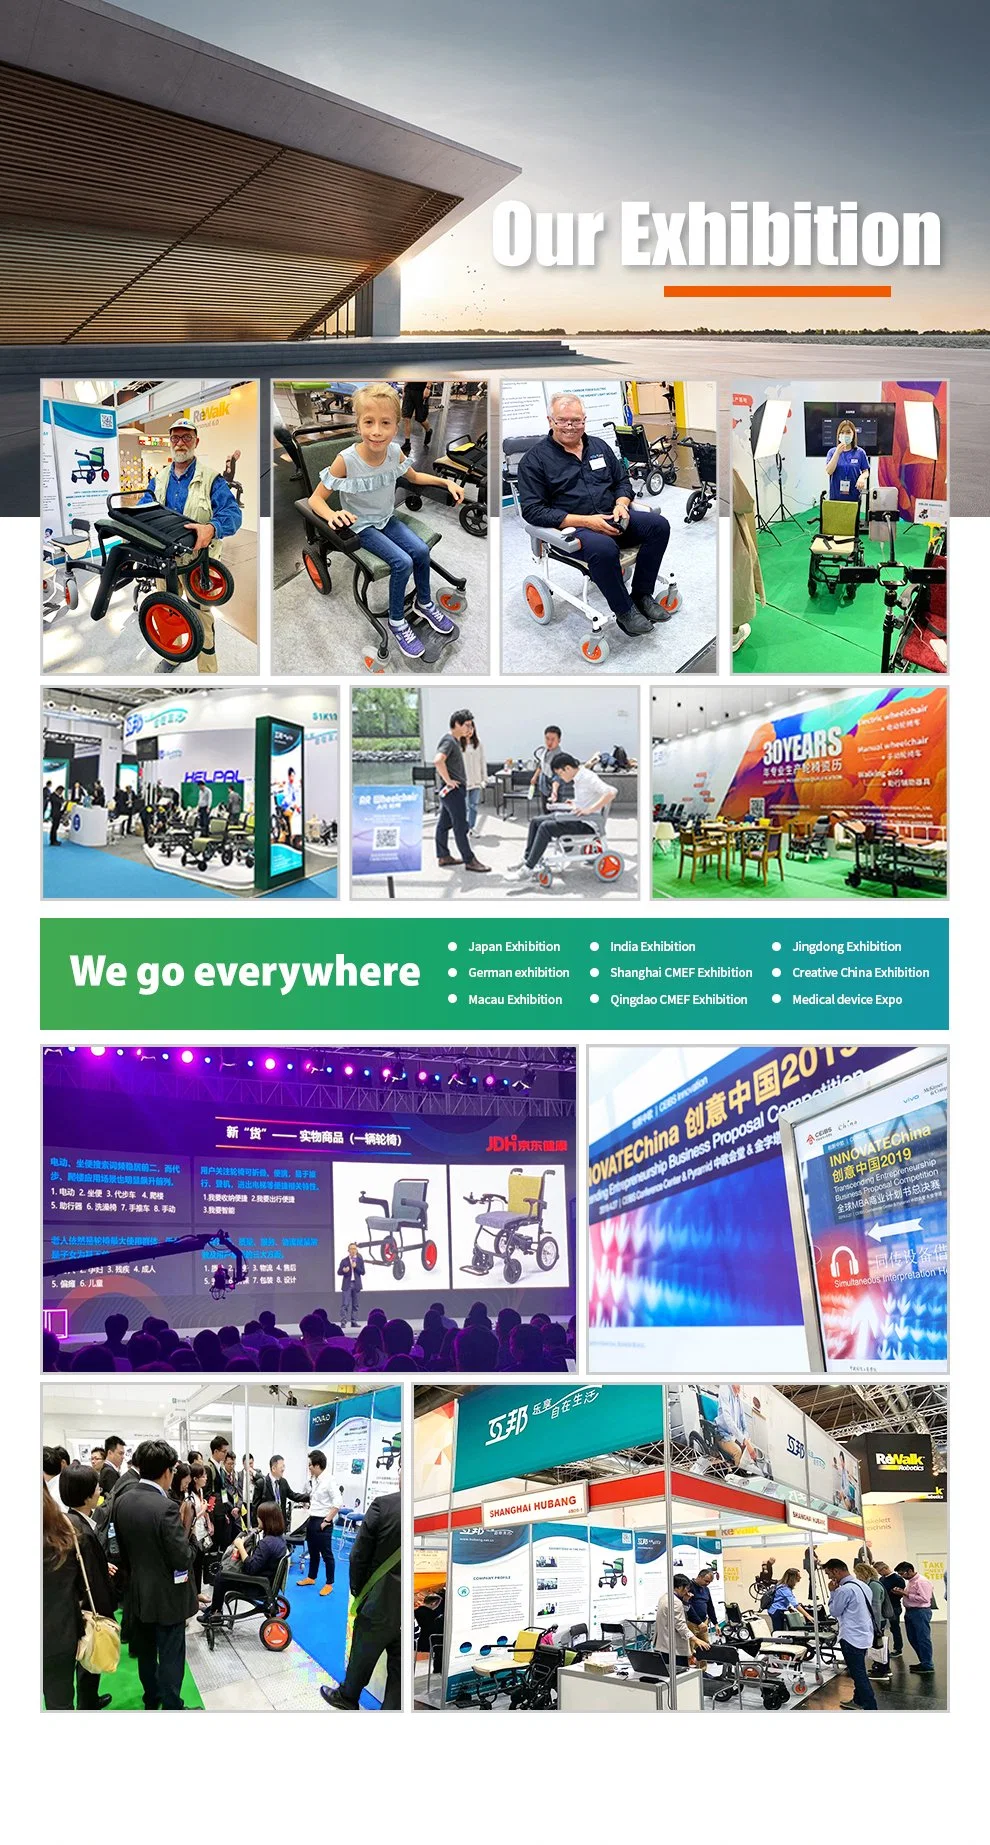 Suitable for Disabled People Travel Care Mobile Hand Push Bicycle Electric Chair Scooter Portable Folding Electric Wheelchair